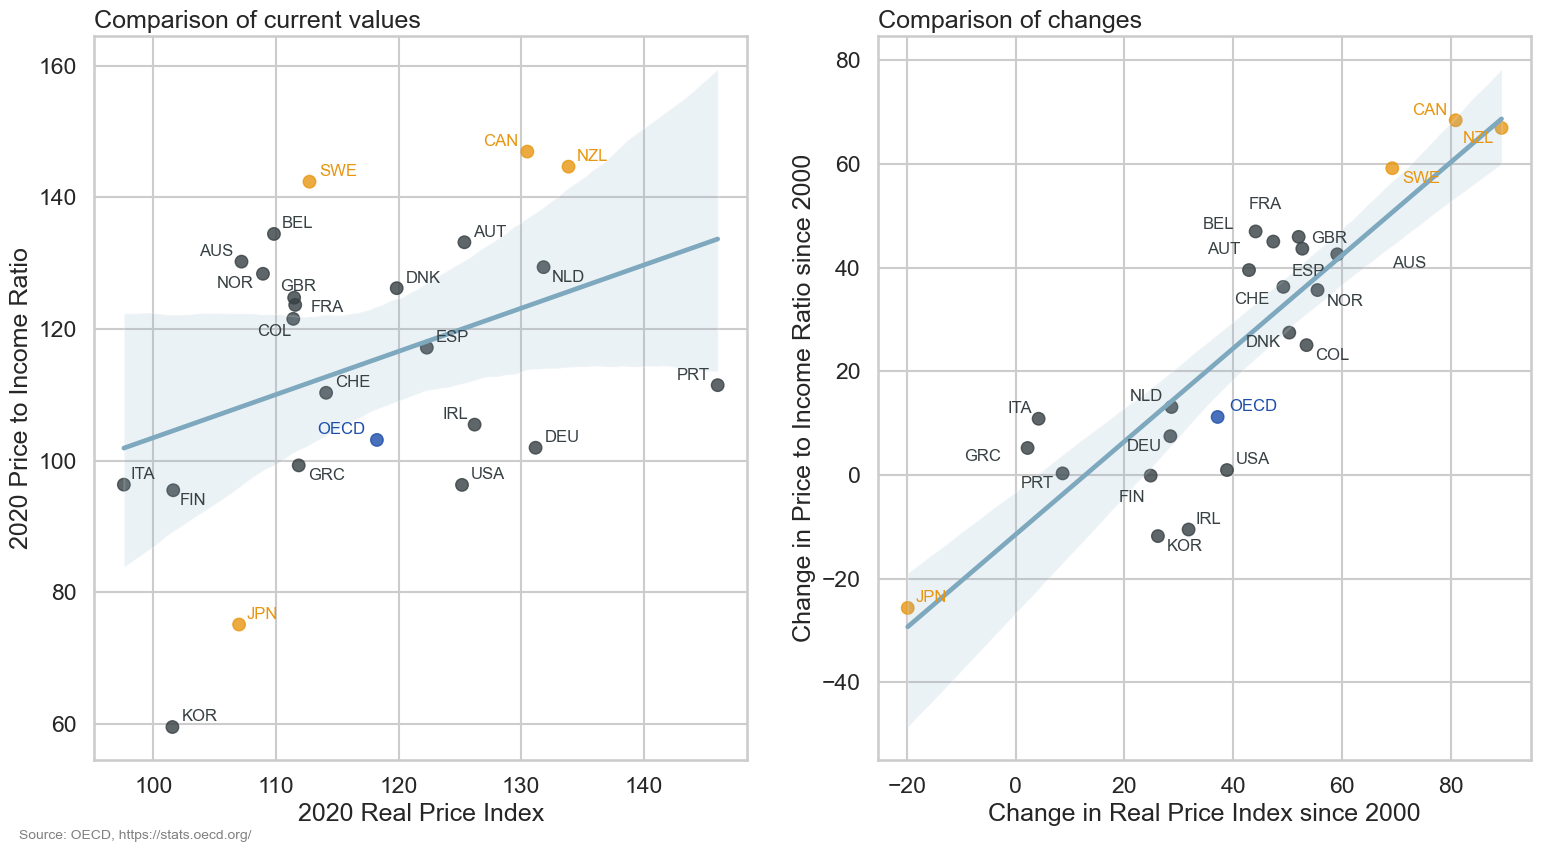 Scatter plot showing the relationship between Real Price Index and price to income ratio in 2020 and the changes since 2000 for selected OECD countries